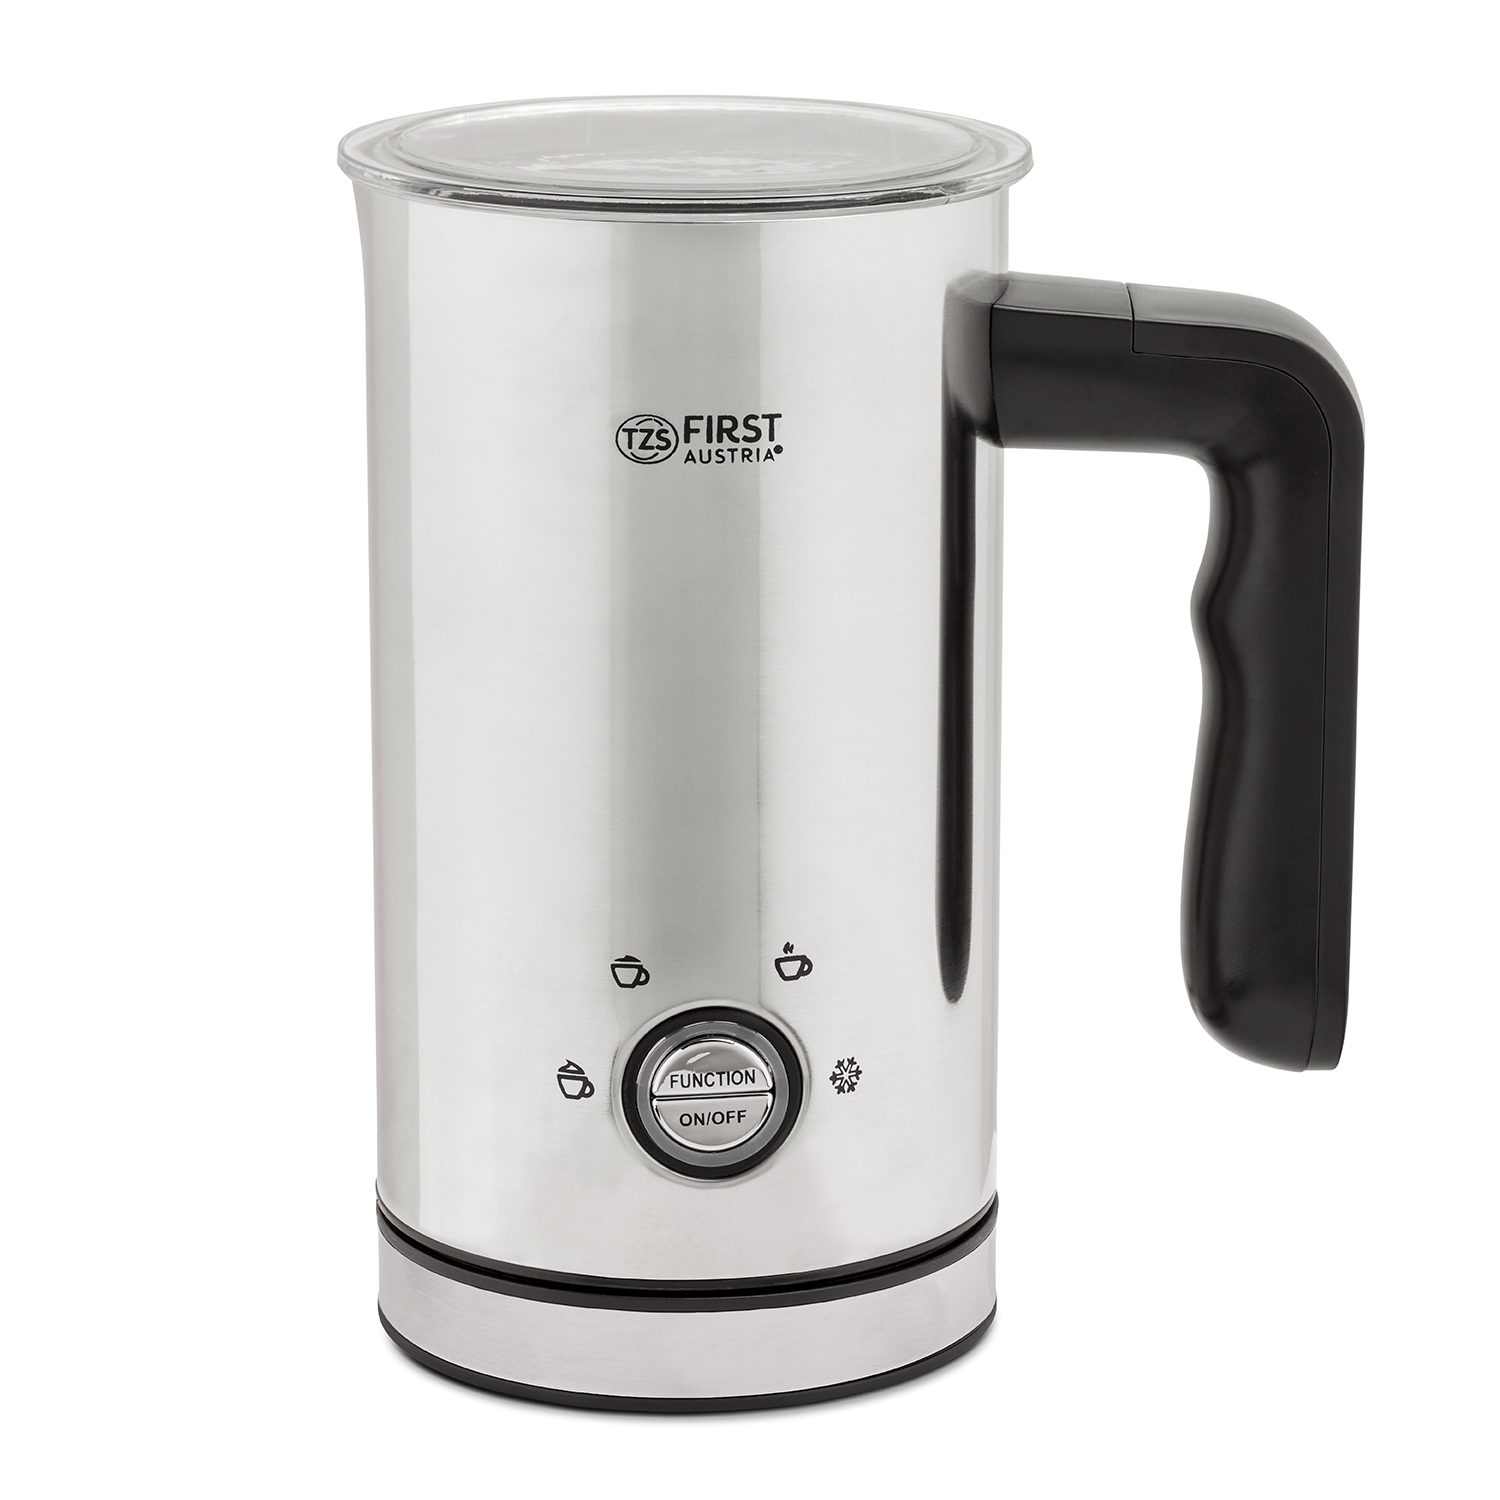 Milk frother | automatic, electric